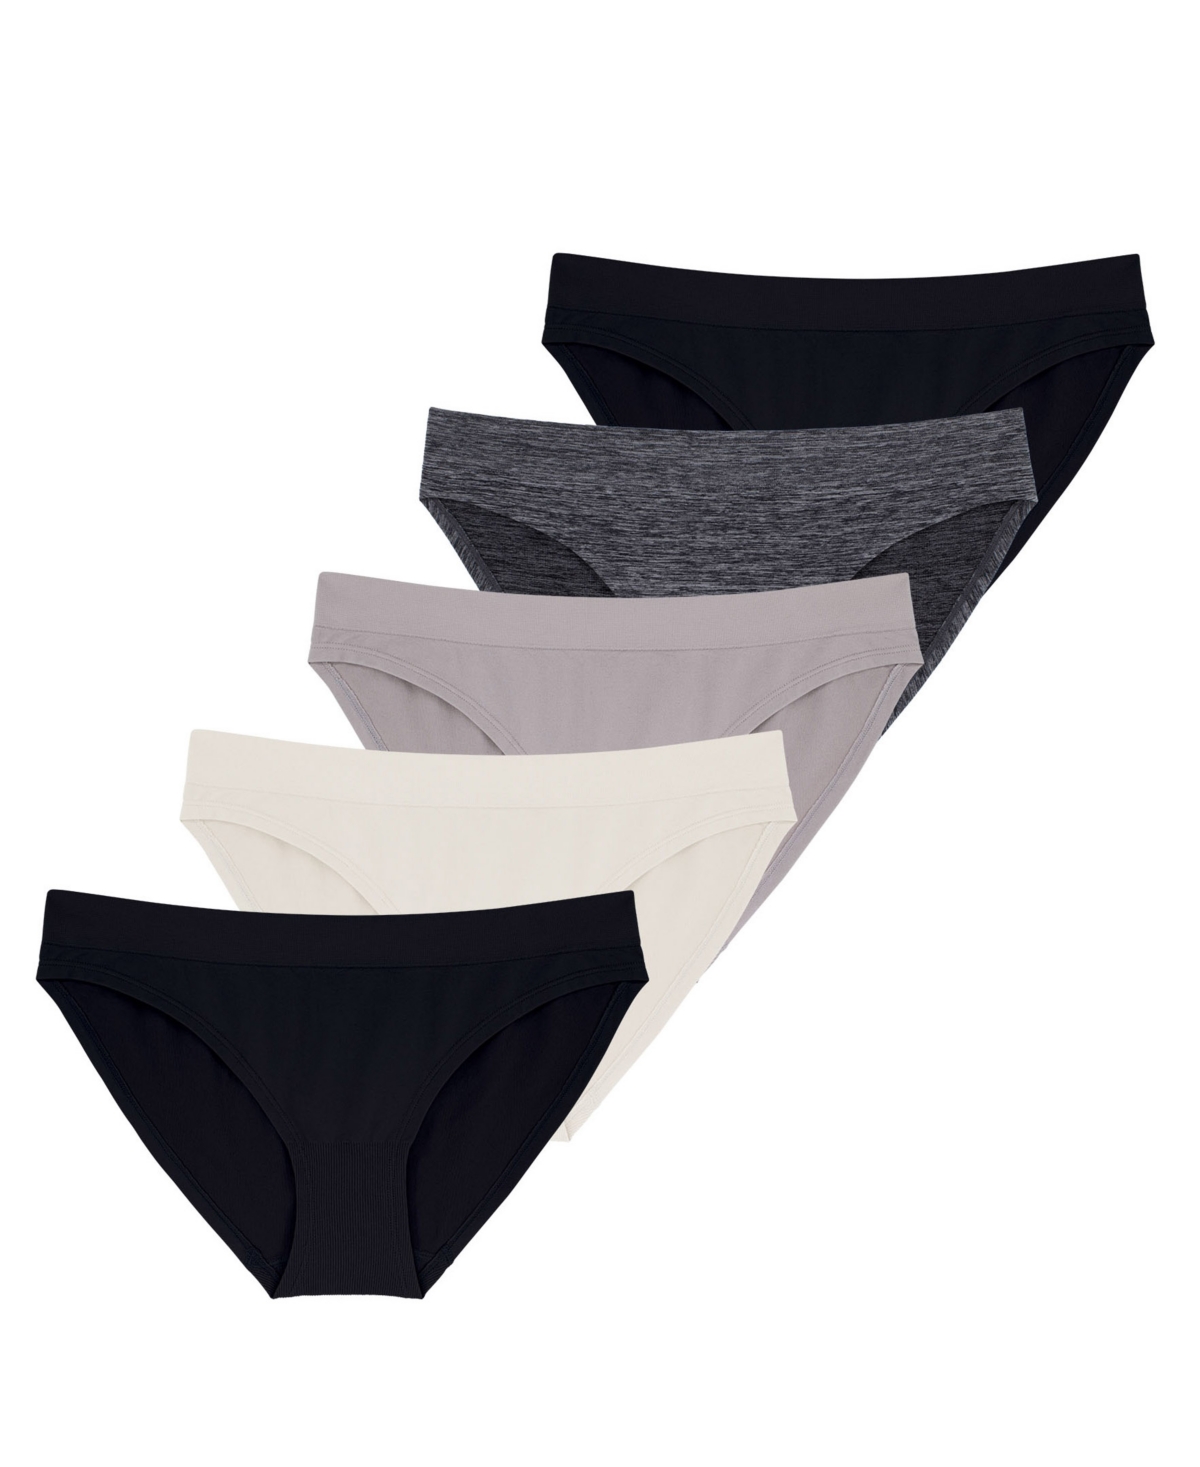 Dorina Women's Rosanne 5 Pack Seamless Soft Touch Fabric Brief Panties In Black,beige,gray,gray,black